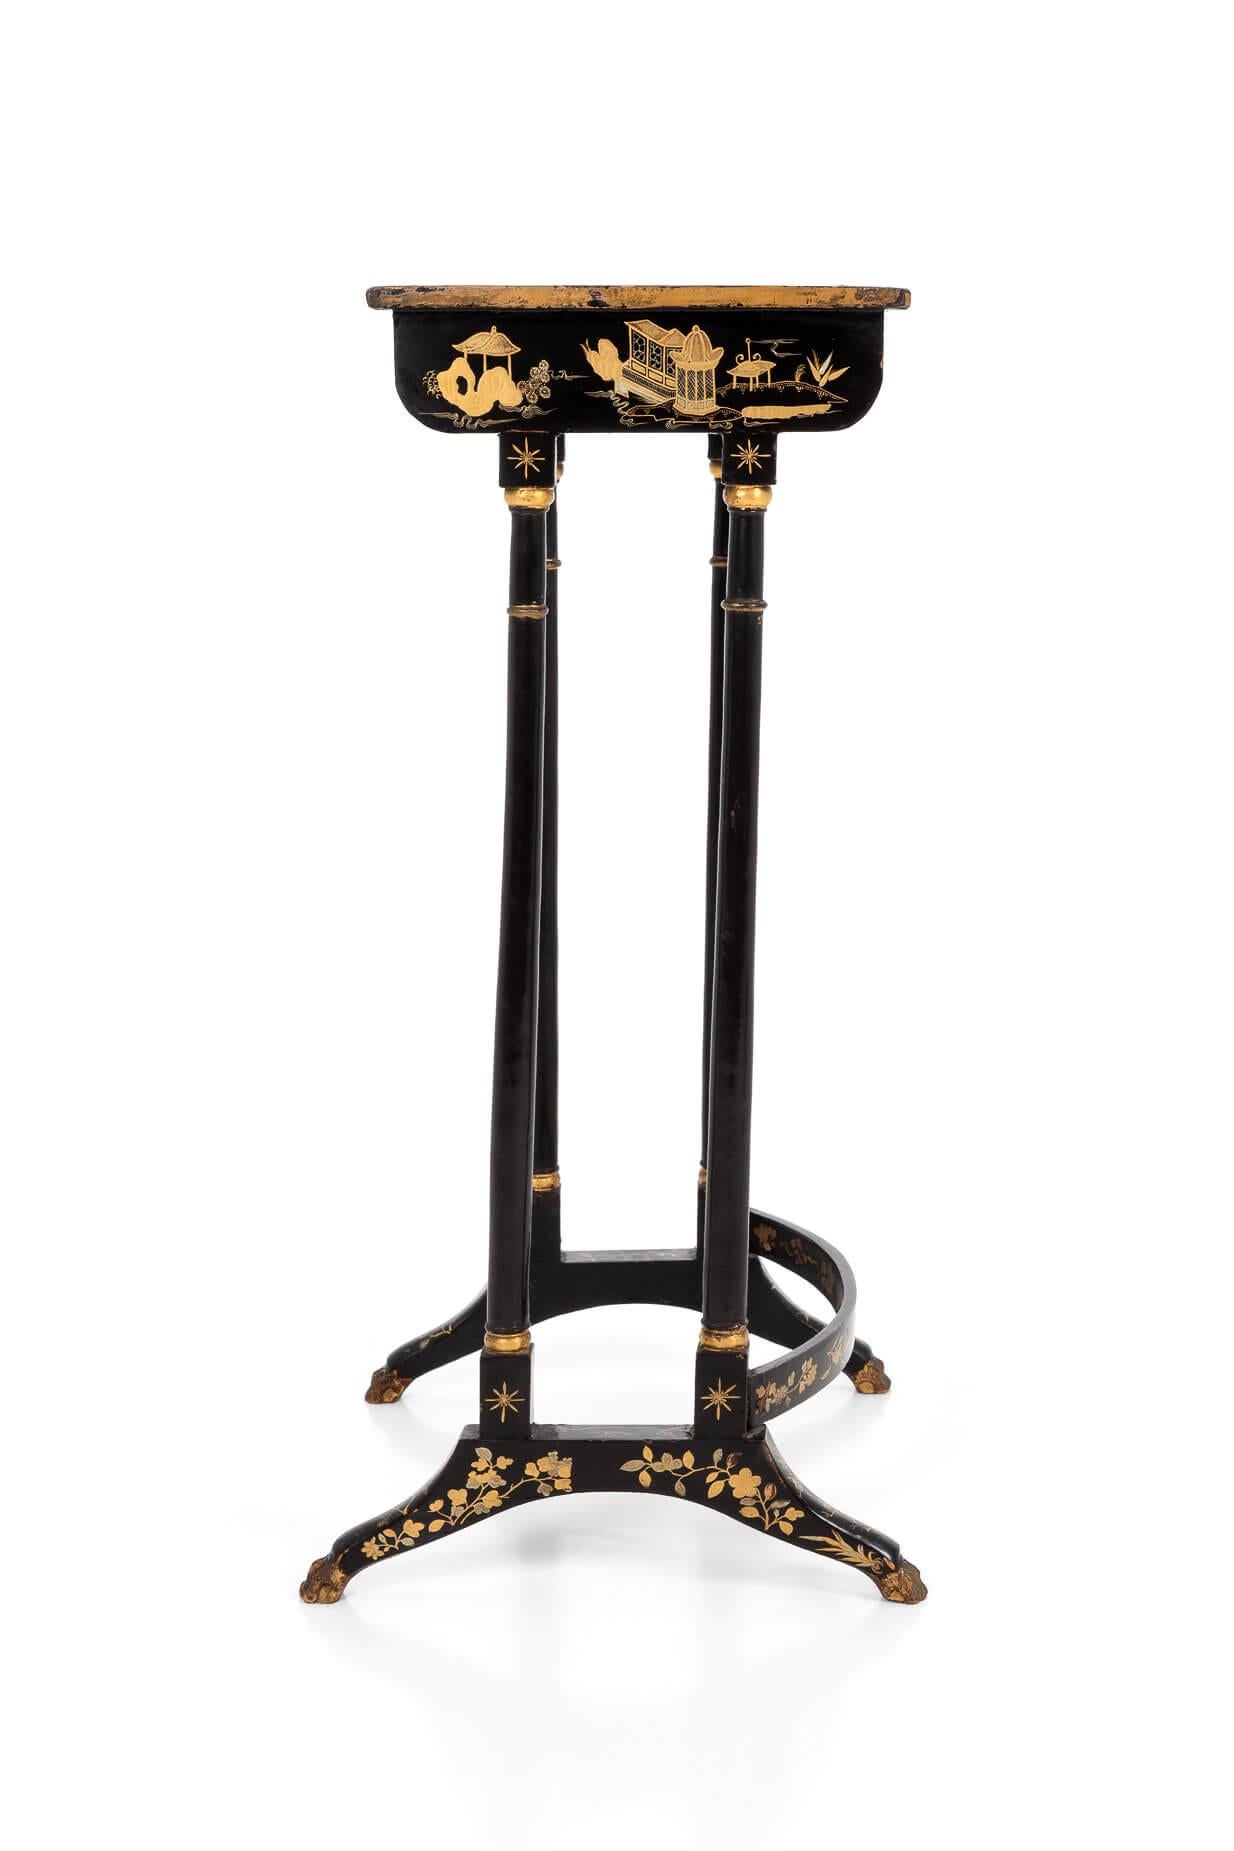 Nest of Three Regency Chinoiserie Gilt And Black Lacquer Tables, circa 1815 For Sale 1